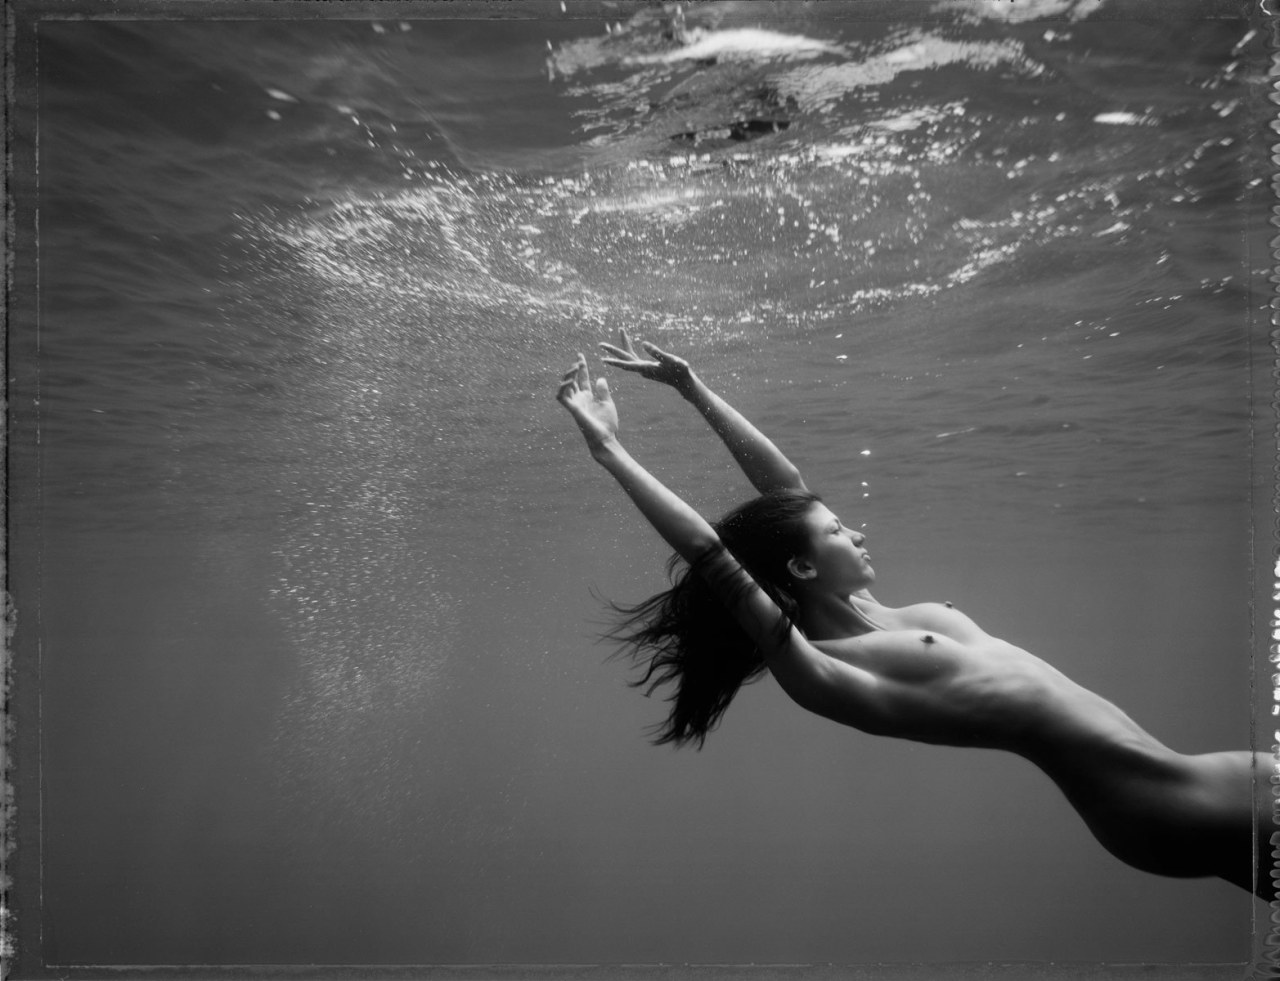 © Ian & Erick Regnard, ca. 2010, Underwater Polaroid Nudes
Ian and Erick Regnard are two Australian brothers who have created a stunning series of underwater nudes. What makes the images even more remarkable is that they shot the series on large...